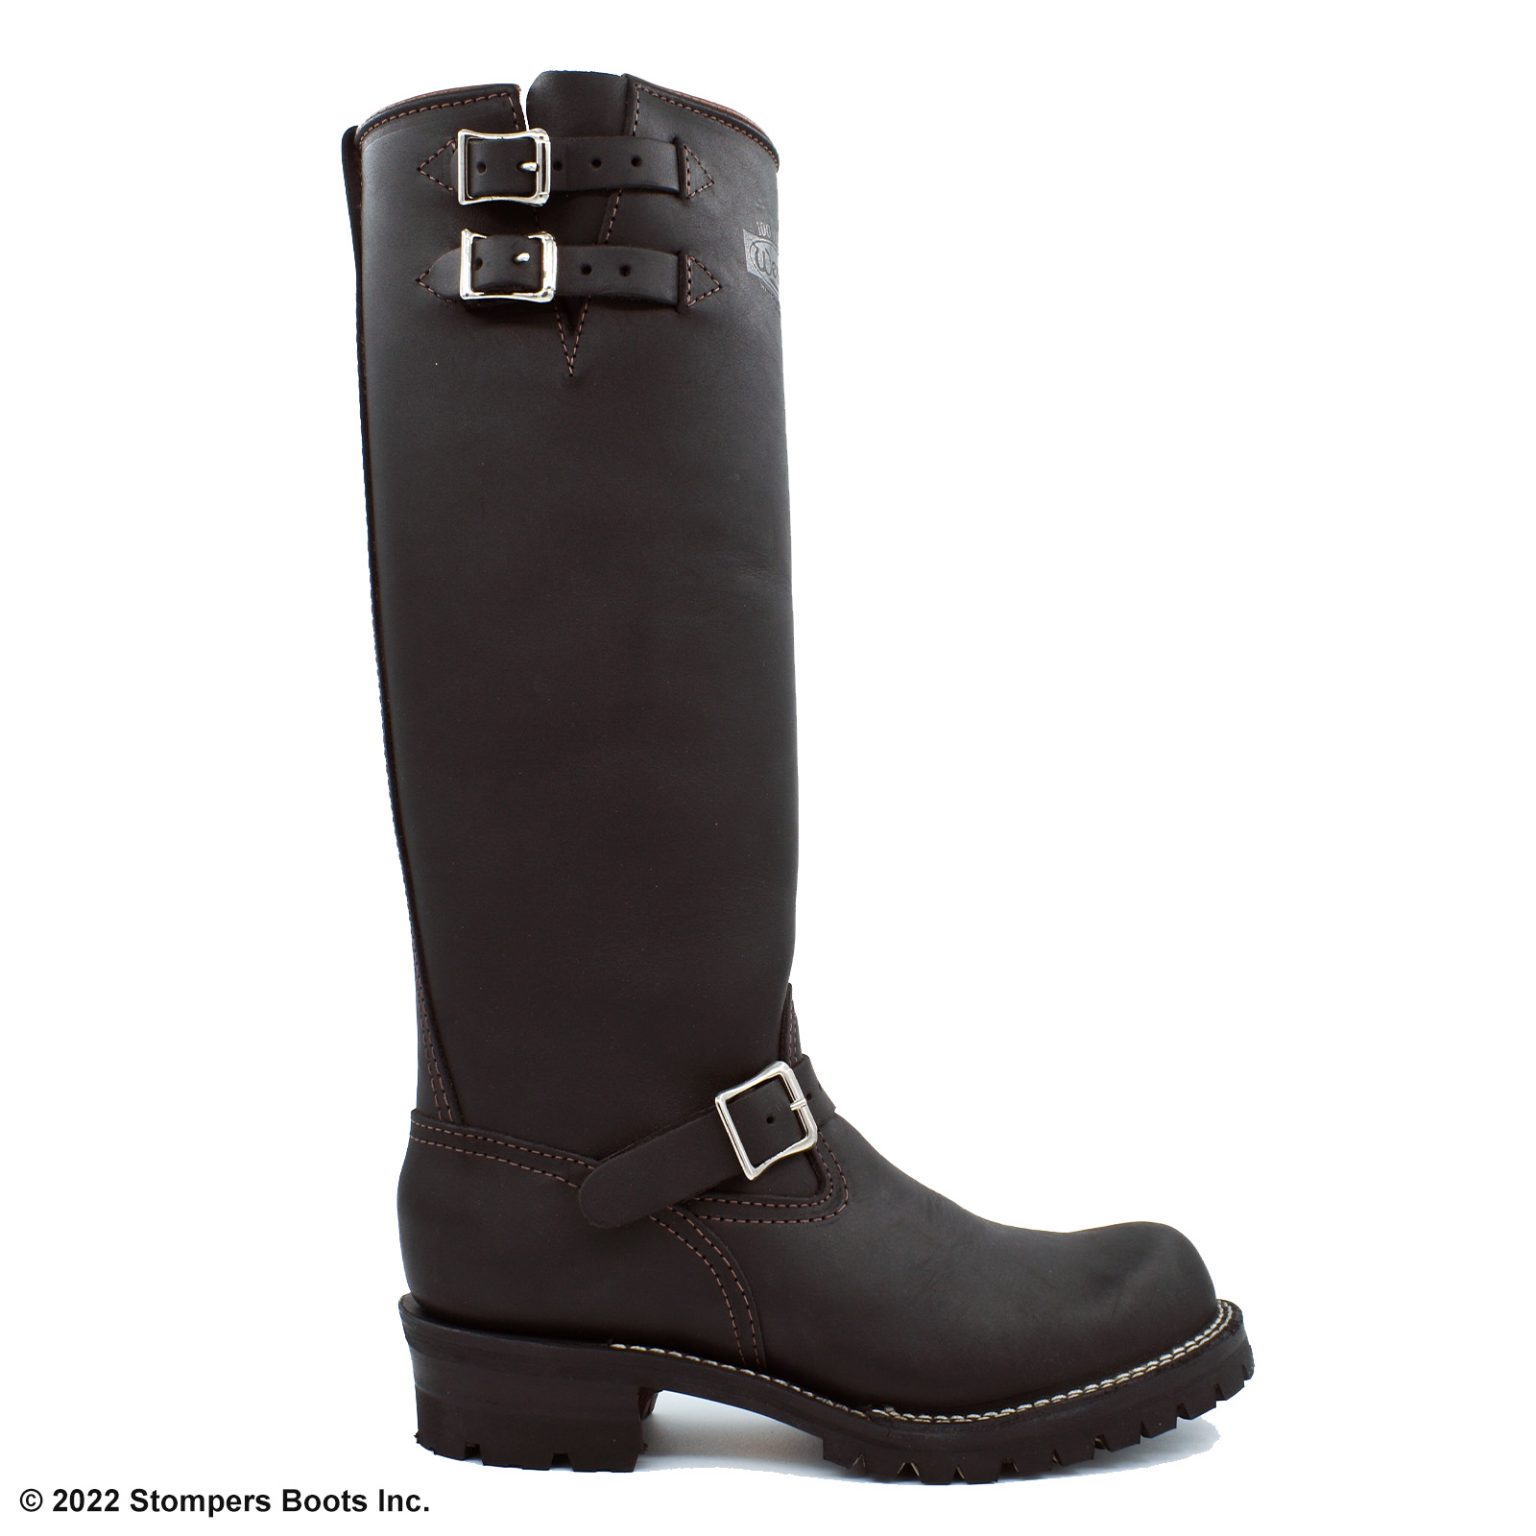 Wesco Boss 16-Inch Black Leather-Lined Boots | Stompers Boots